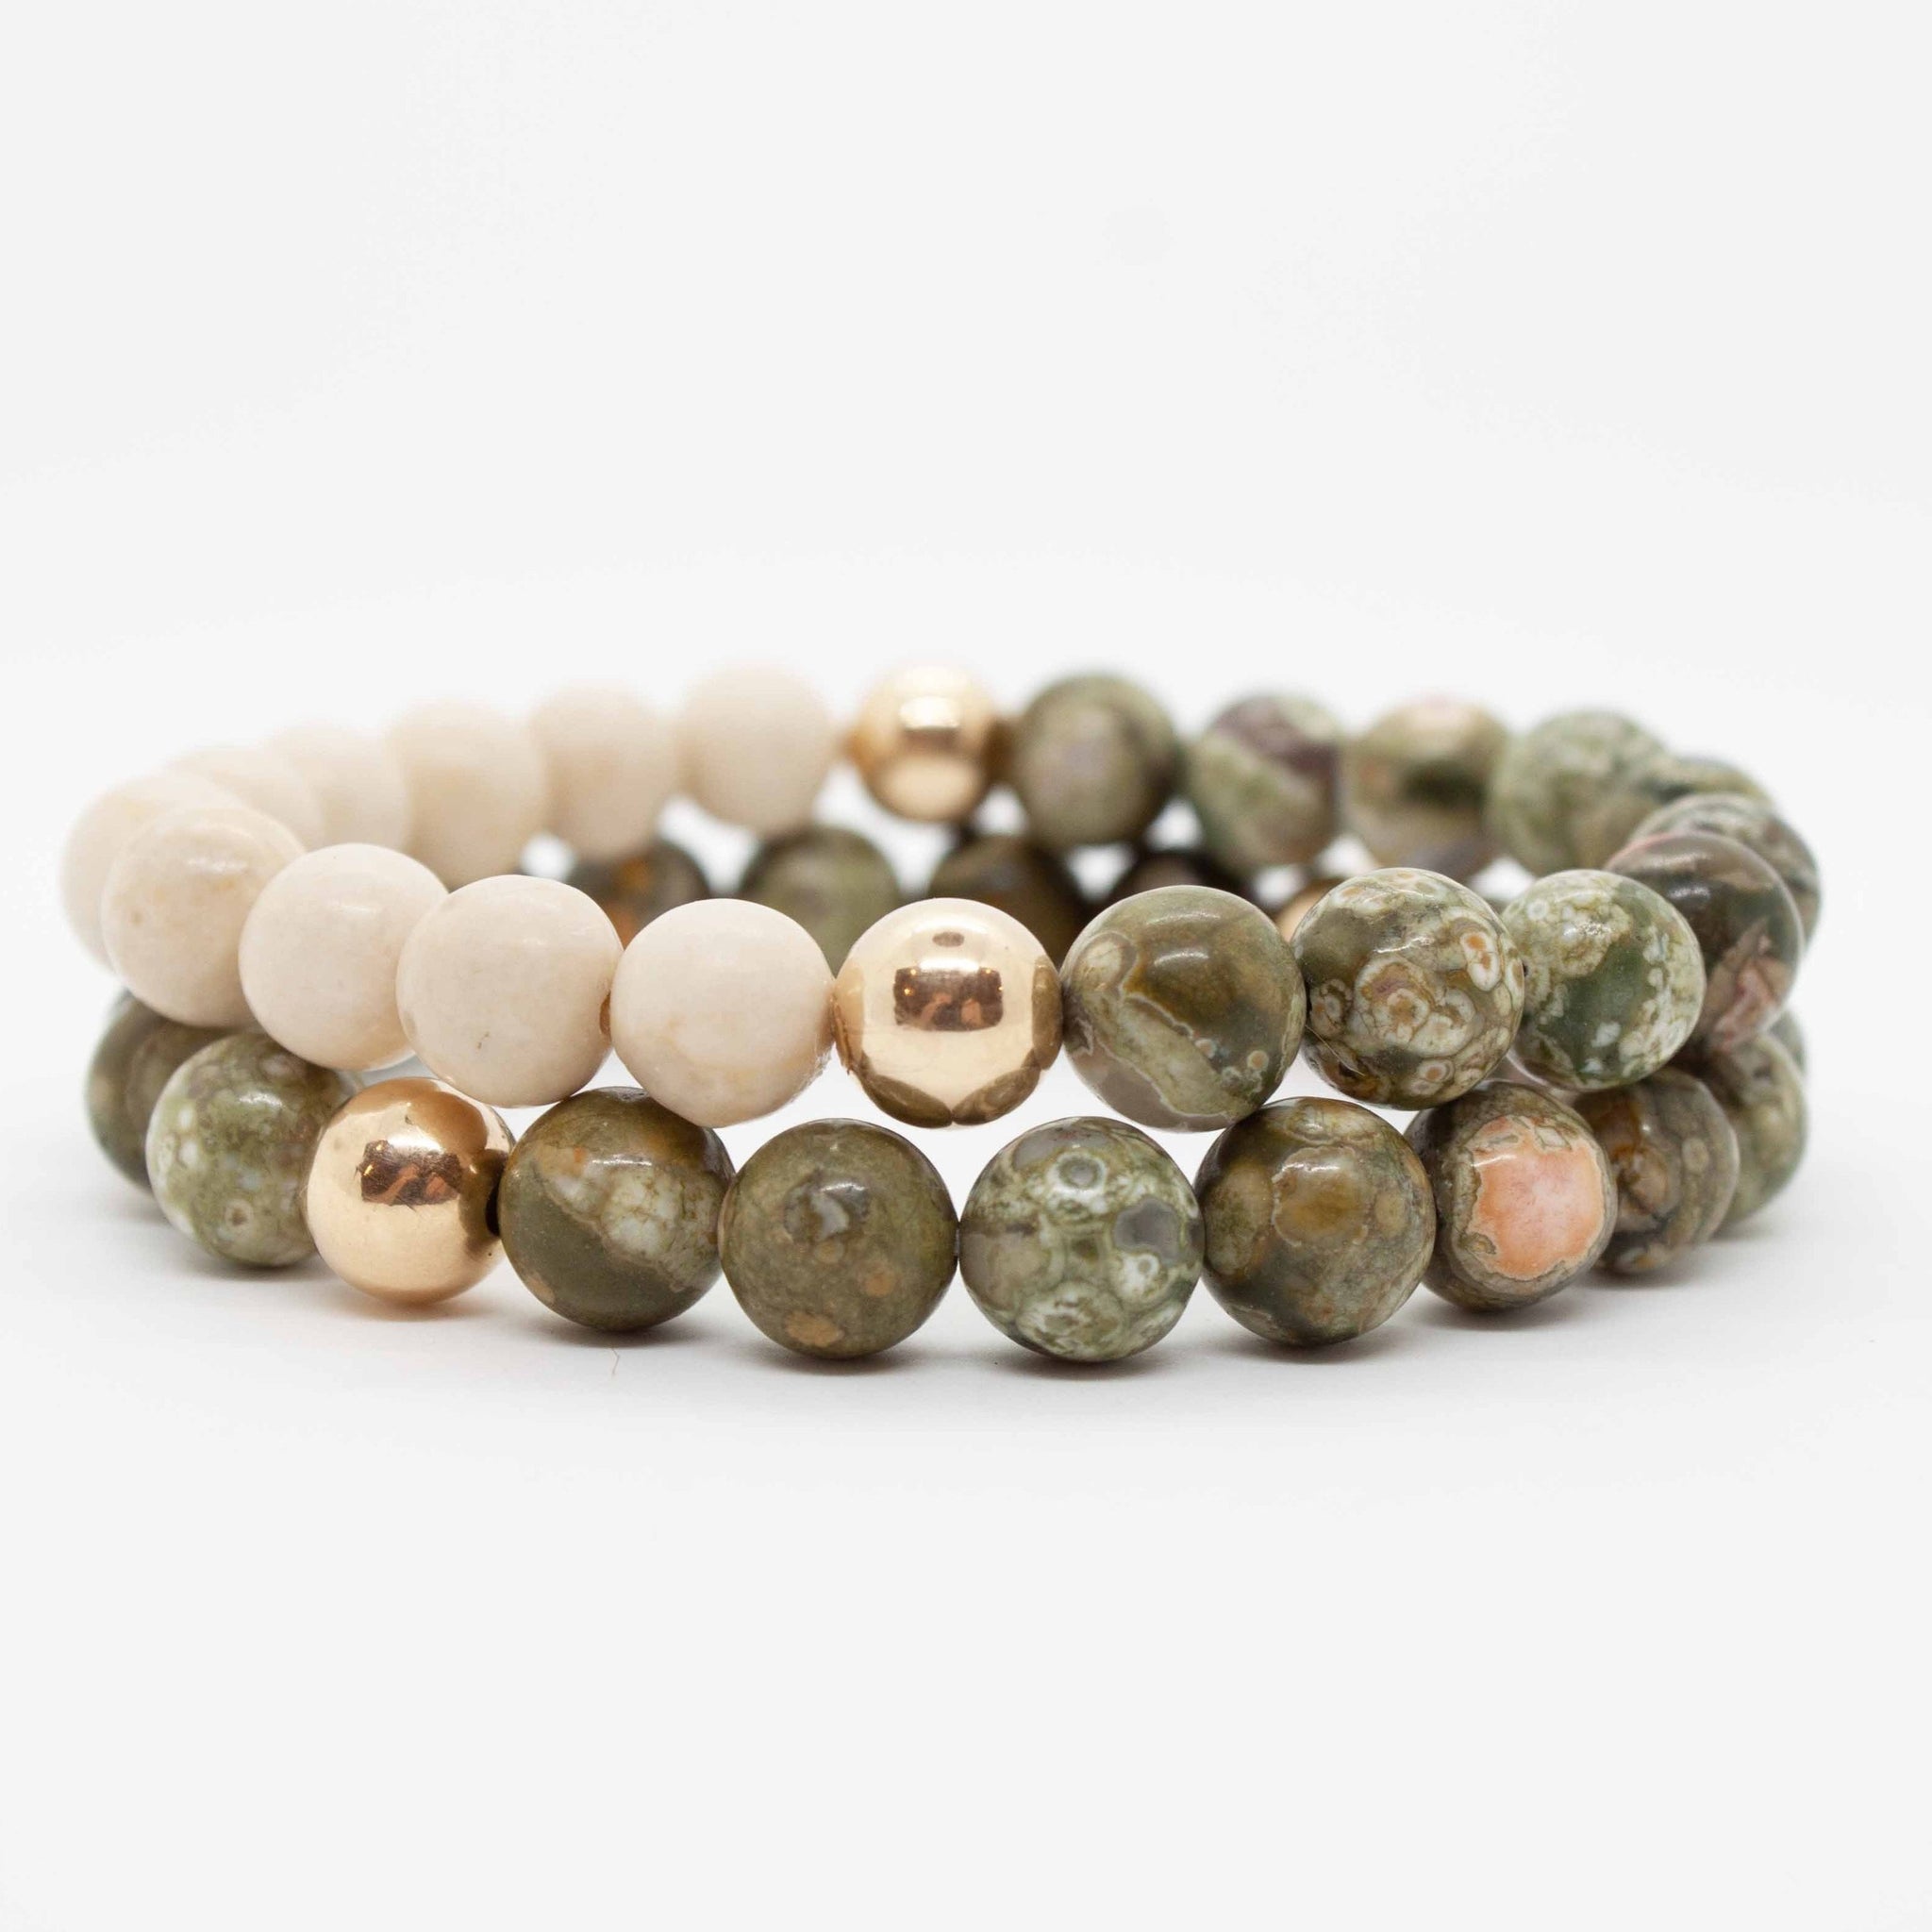 These beautiful rainforest jasper beads are the perfect way to commune with your love for nature. one 7" rainforest jasper, riverstone & gold bracelet, double strung with silk elastic. Handmade in Toronto by kp jewelry co.